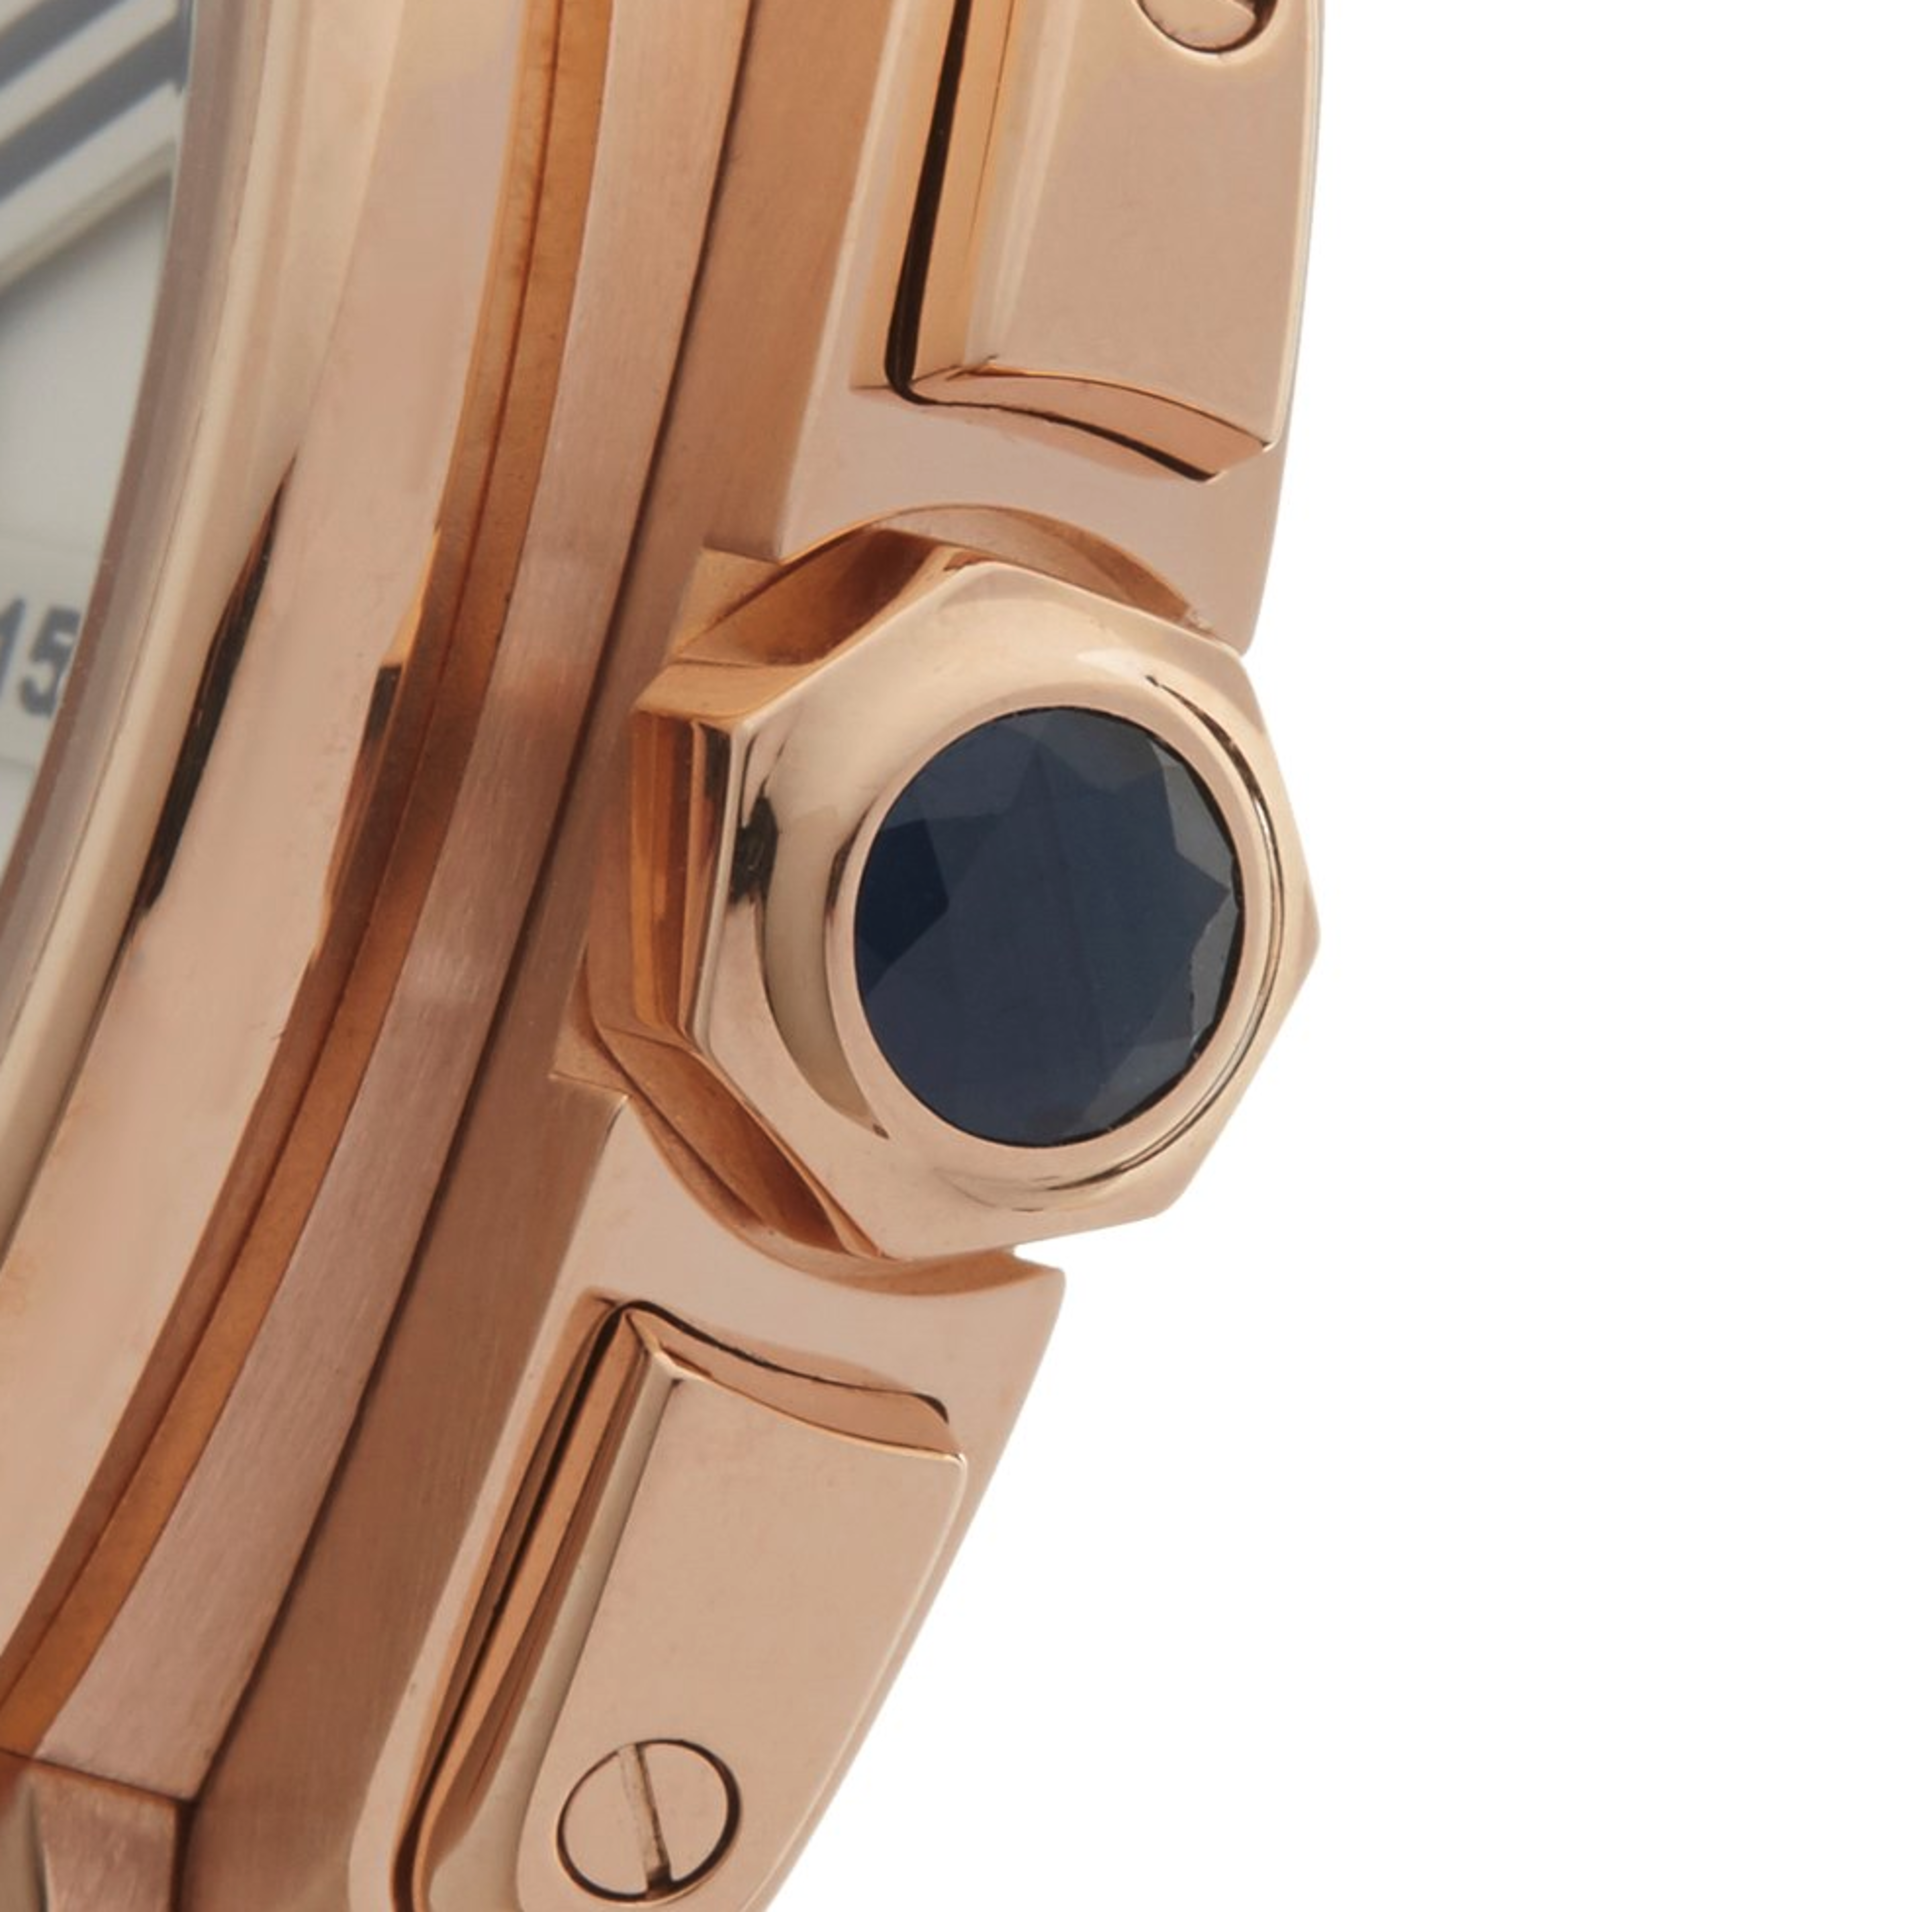 Cartier Calibre Central Chronograph 44mm 18K Rose Gold - 3242 or W7100004 - Image 3 of 9